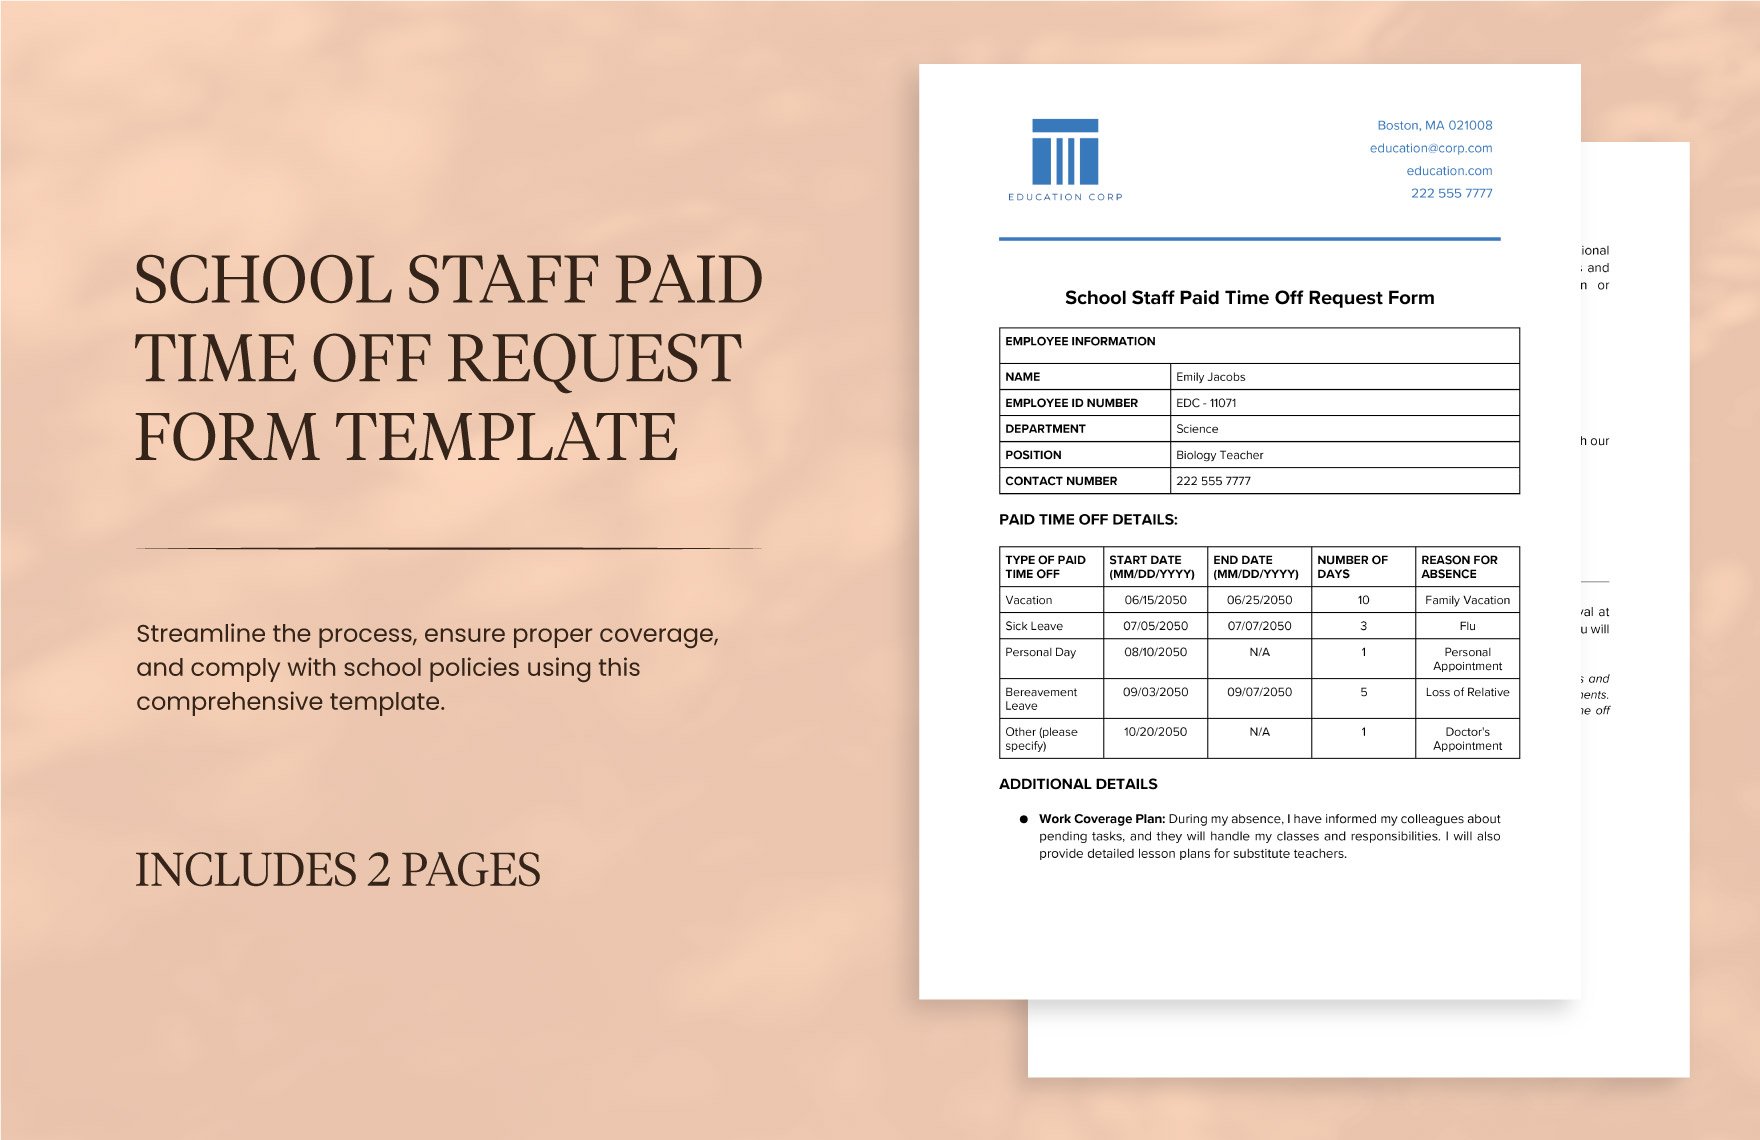 School Staff Paid Time Off Request Form Template